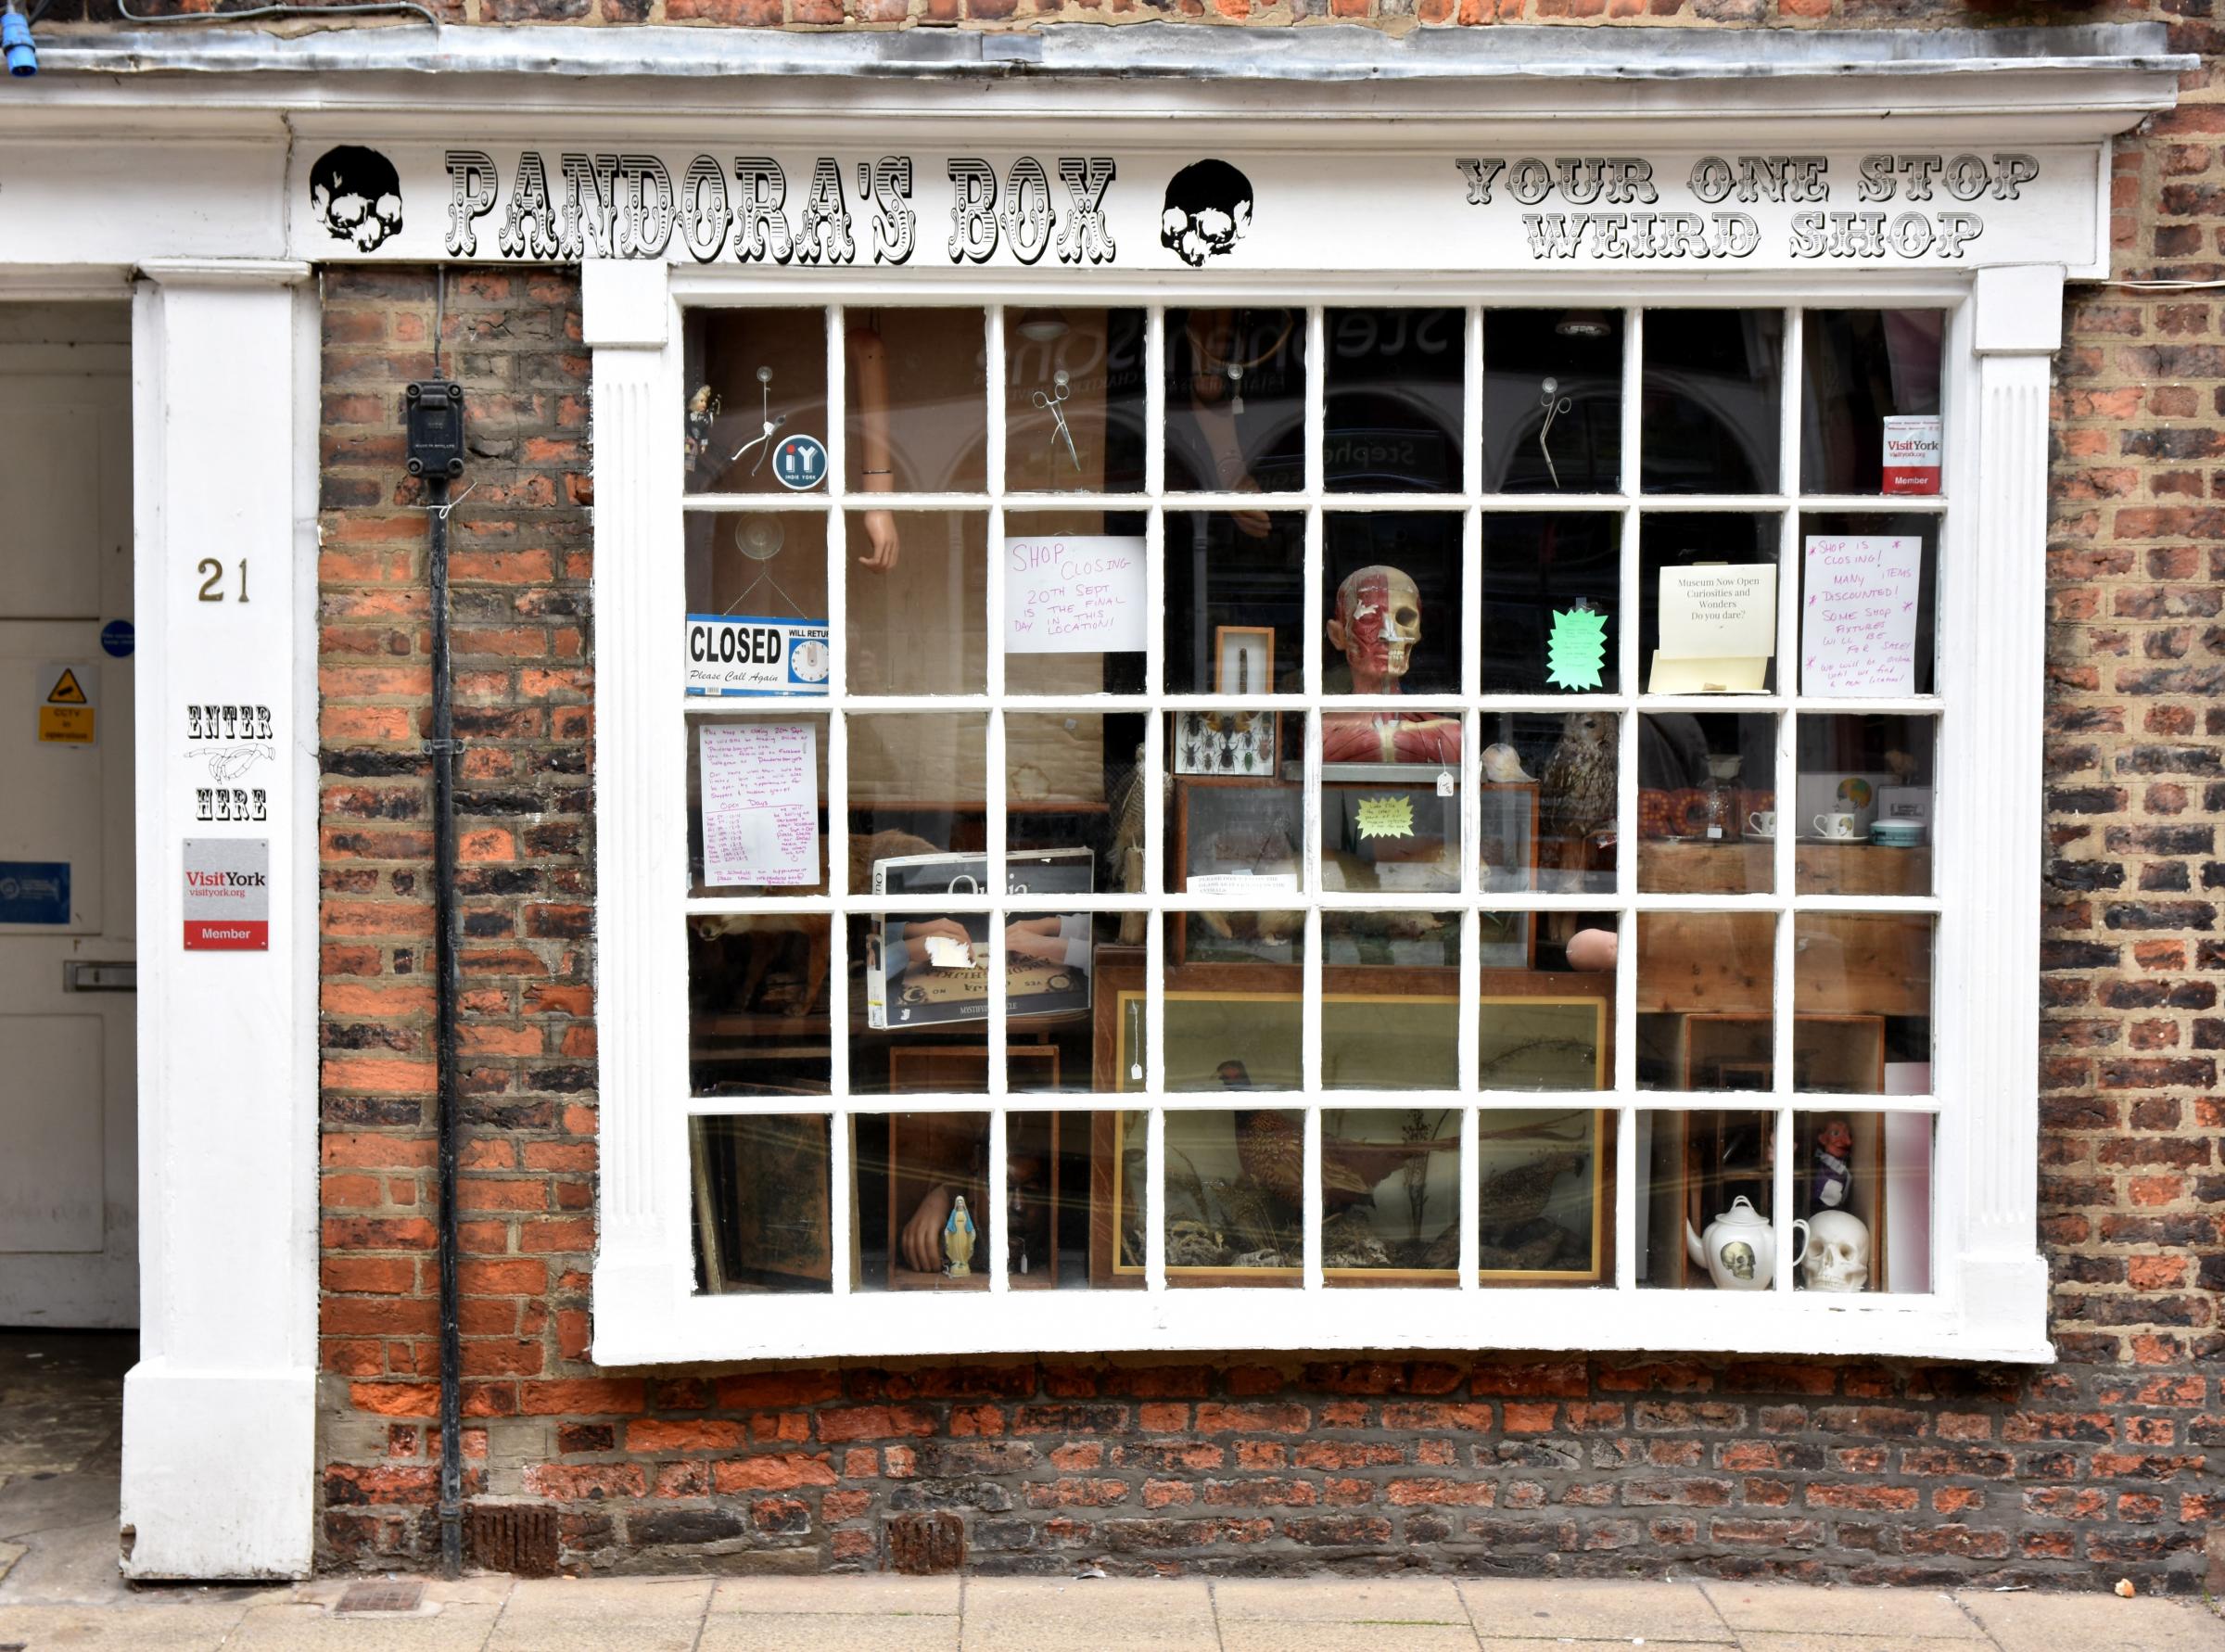 38 PICTURES: York's closed shops